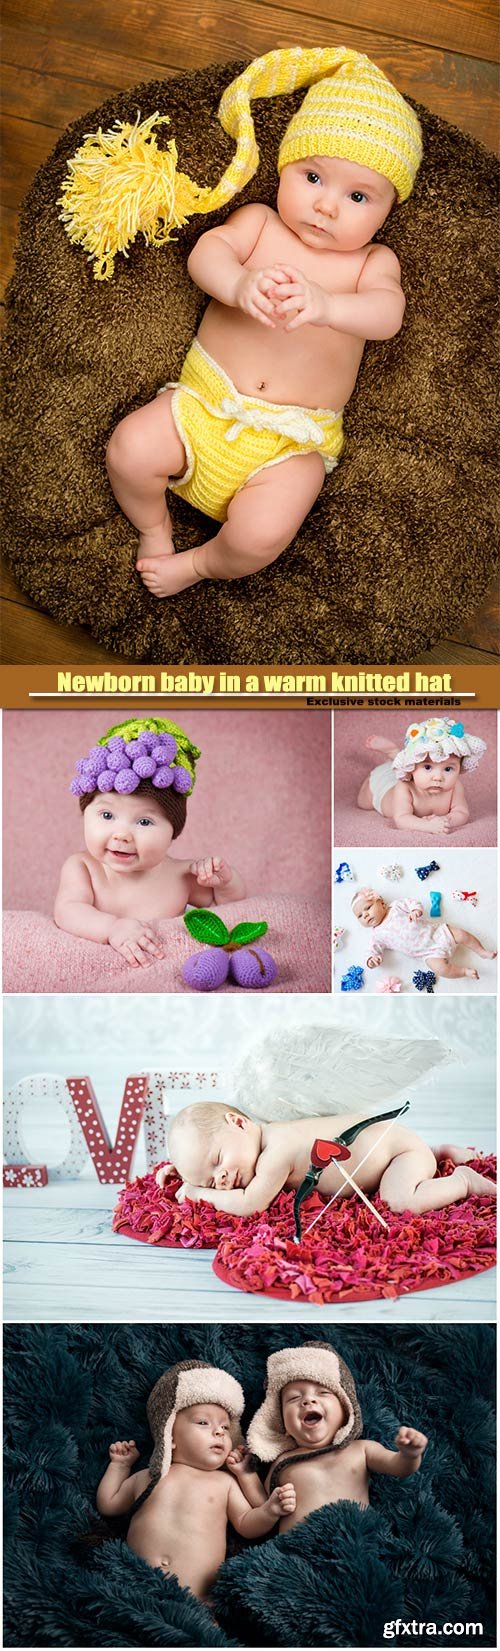 Newborn baby in a warm knitted hat, family, new life, beginning concept